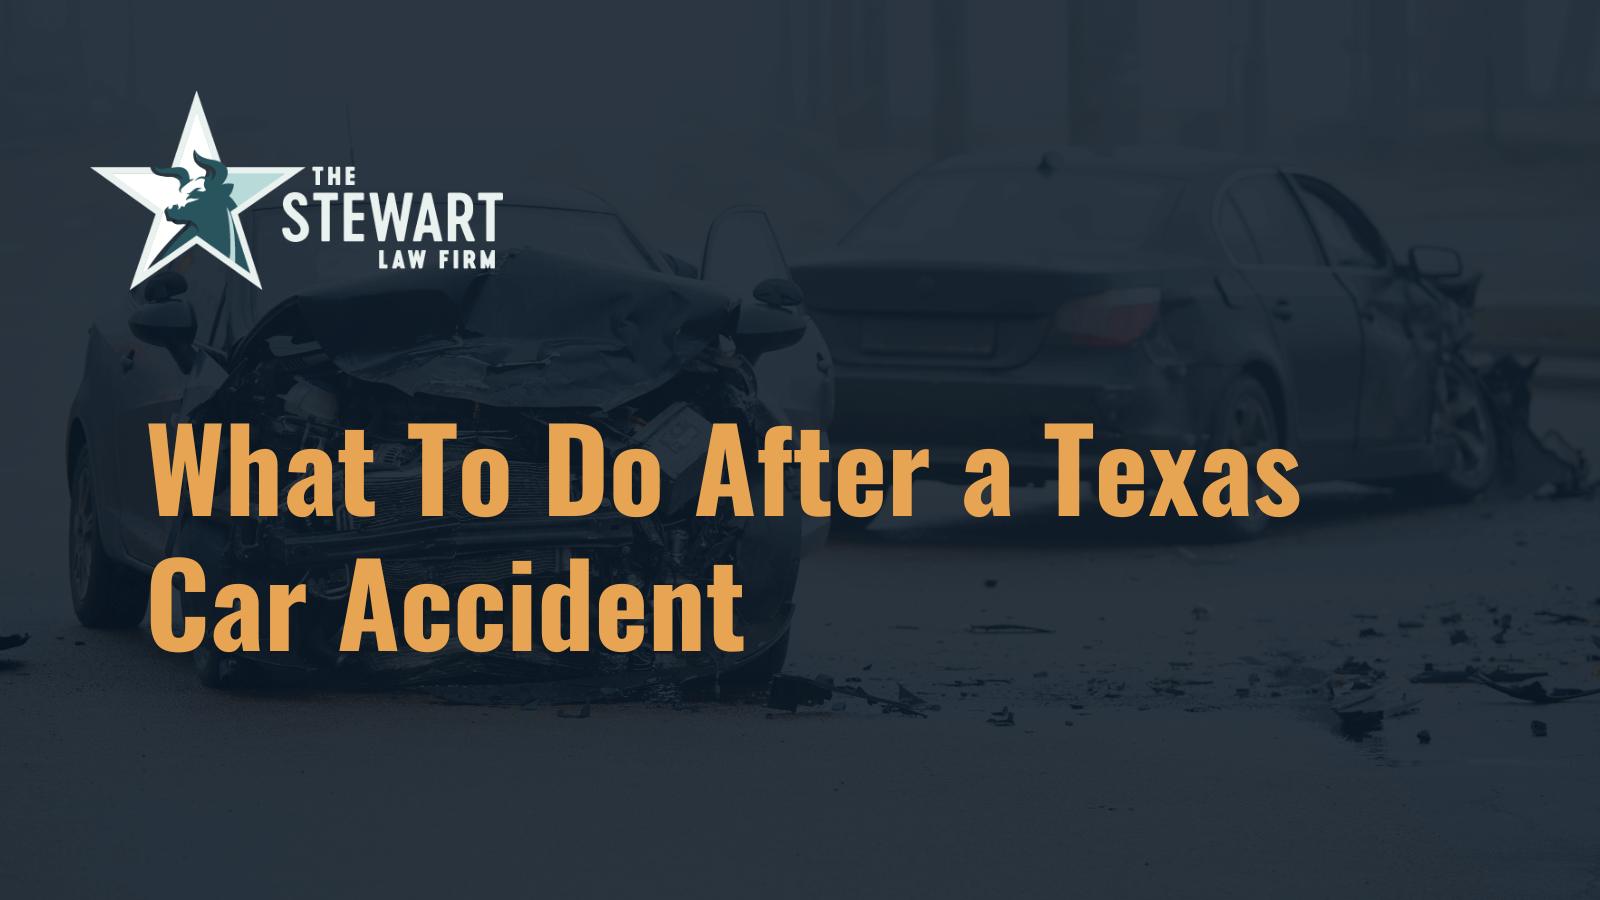 What to do after a Texas car accident - the stephen stewart law firm - austin texas personal injury lawyer